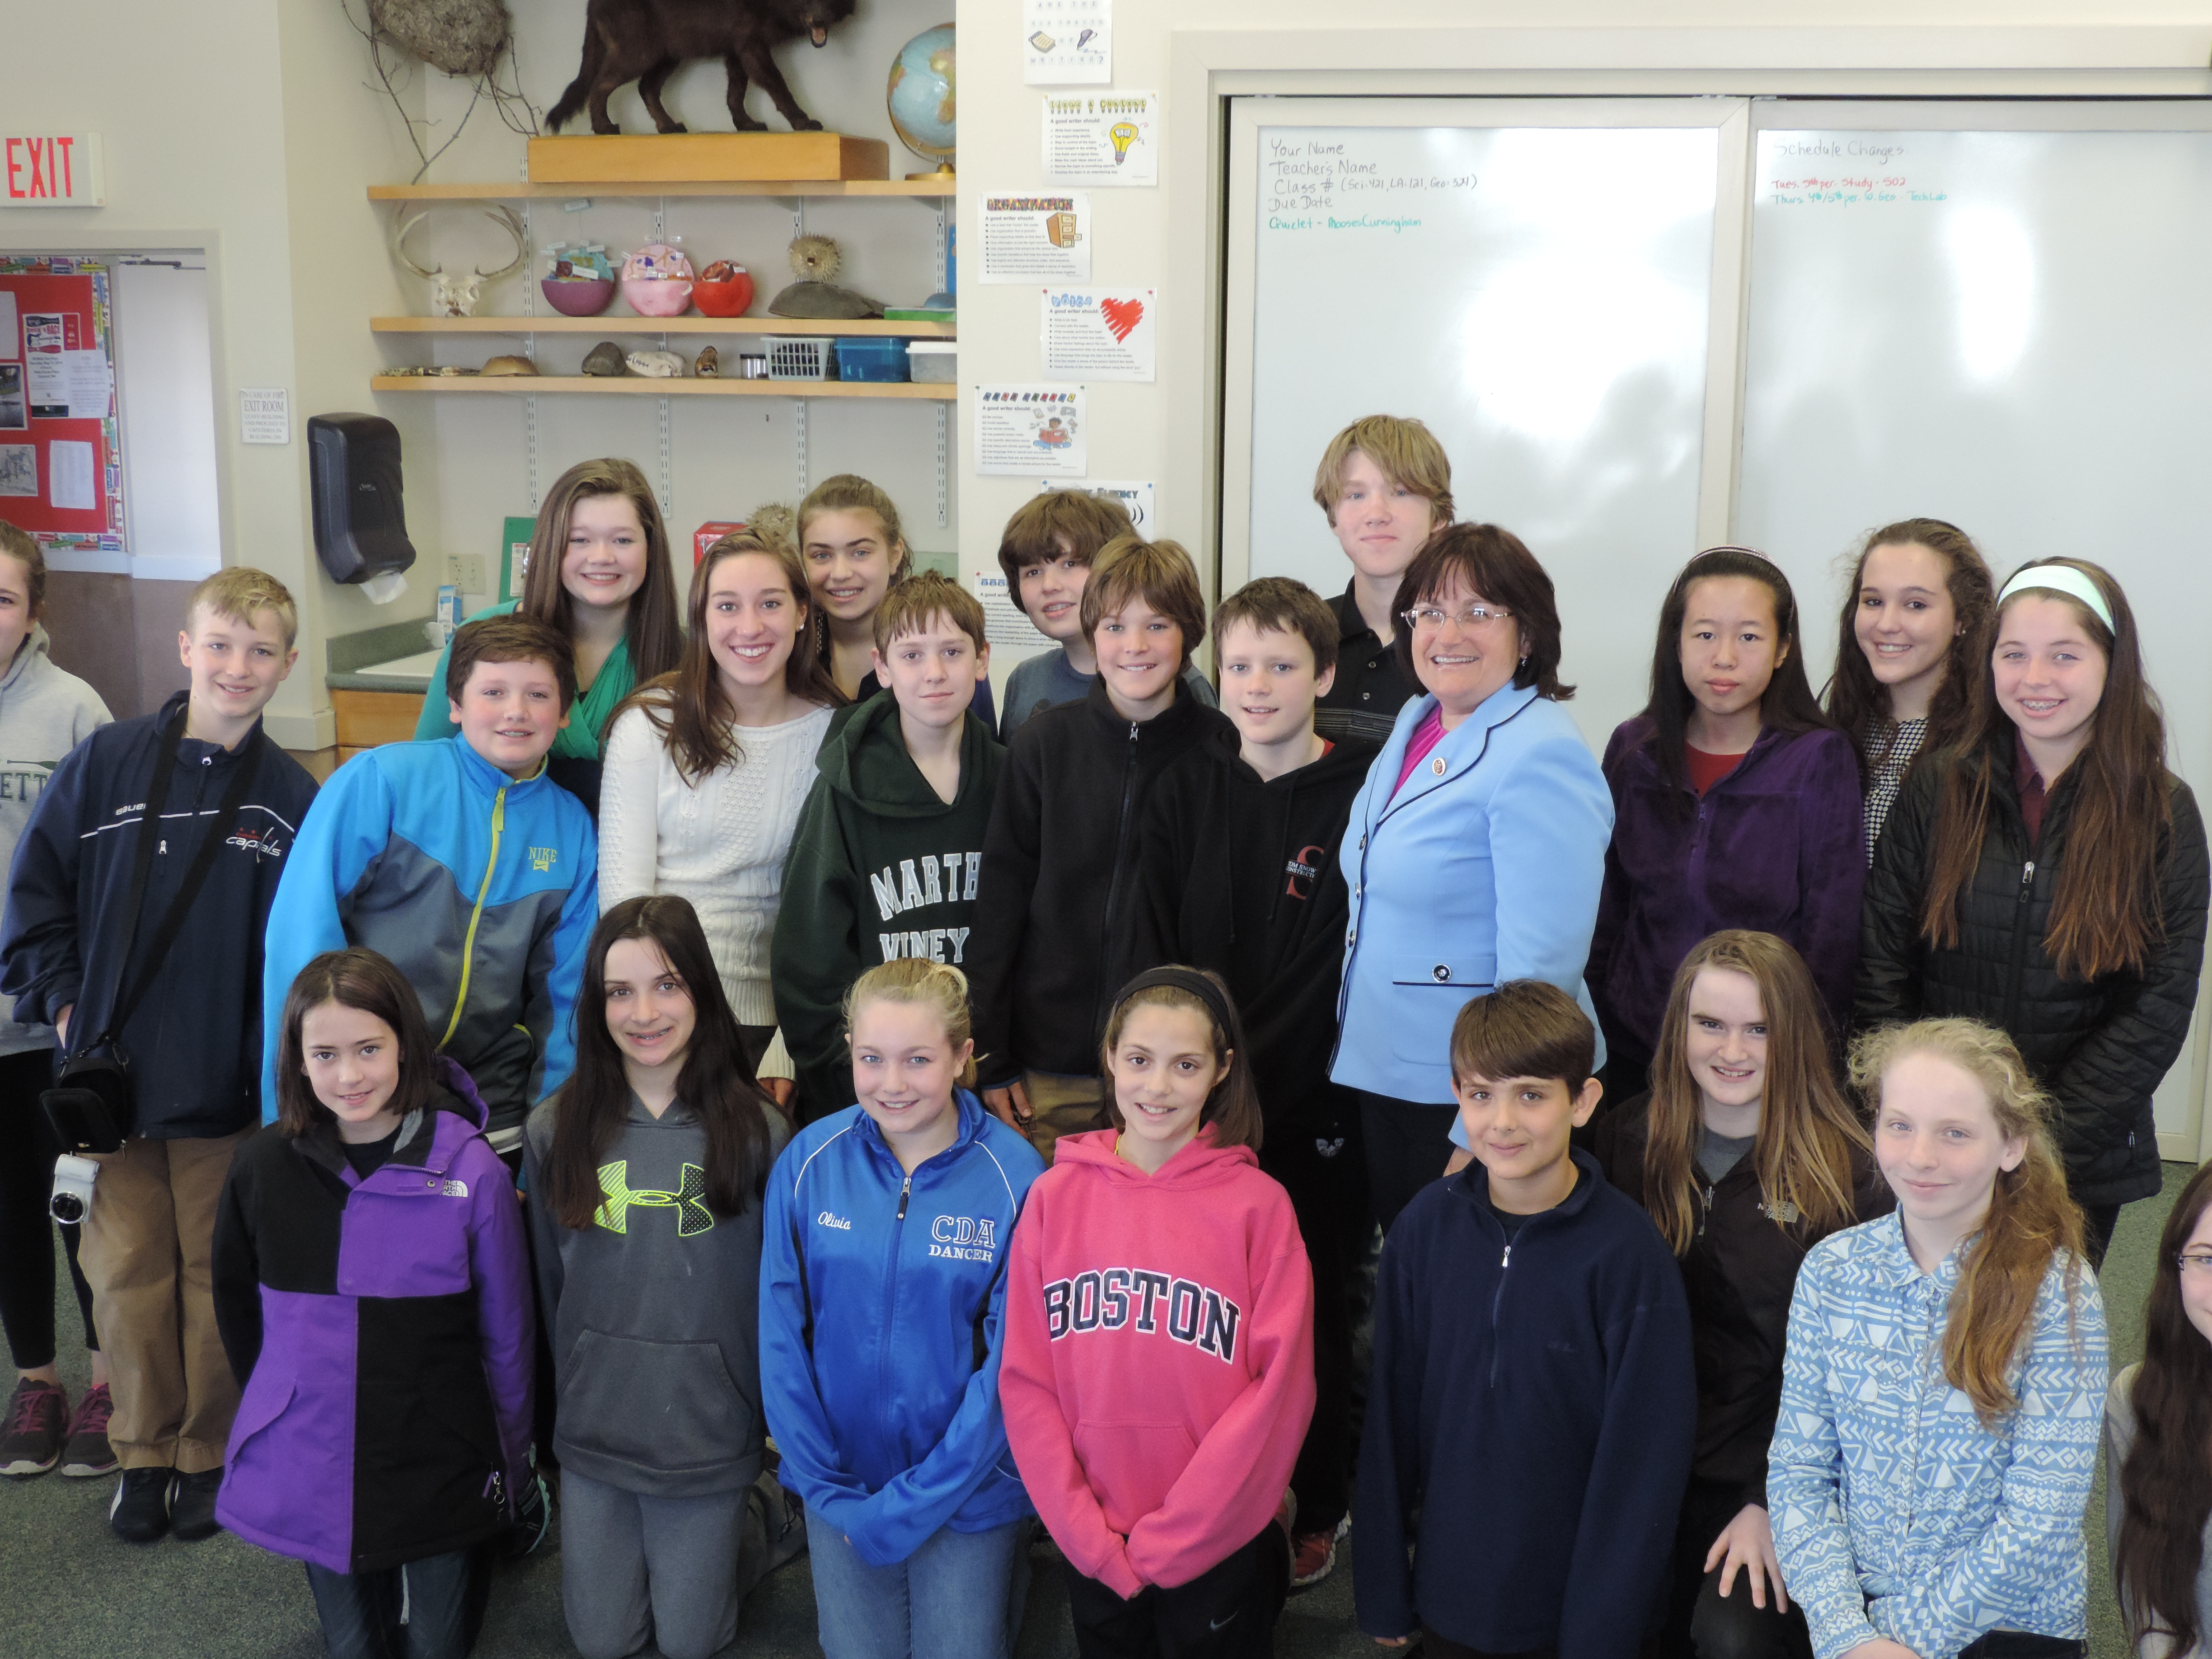 Wednesday, April 16, 2014 | Congresswoman Kuster visits with Shaker Road Students